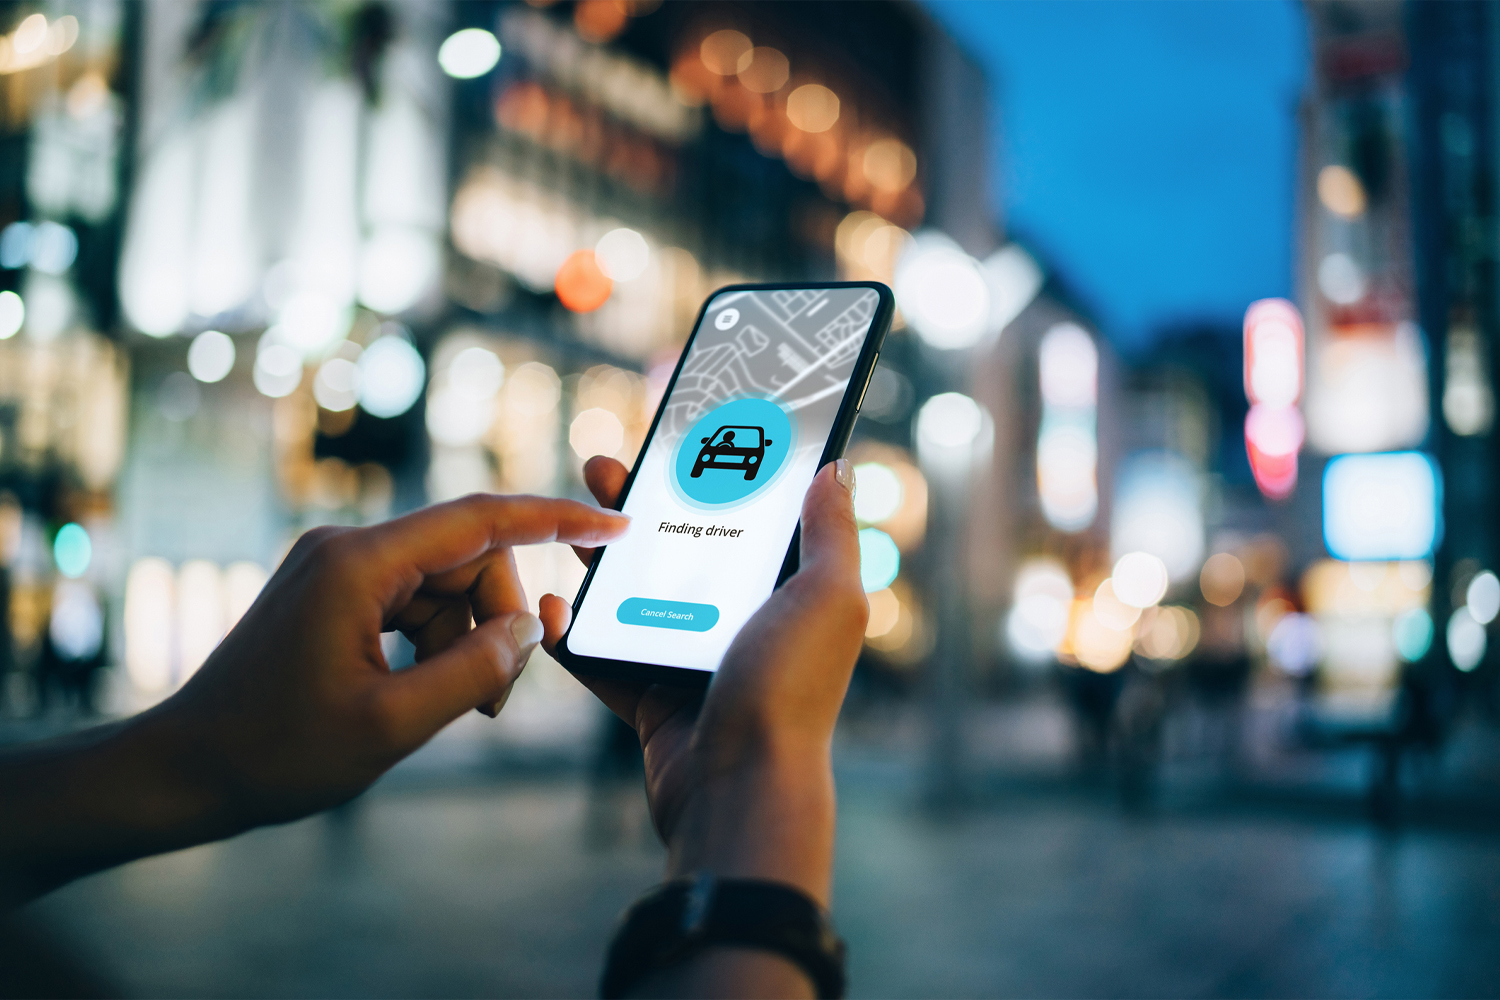 Ride sharing apps have made limos obsolete